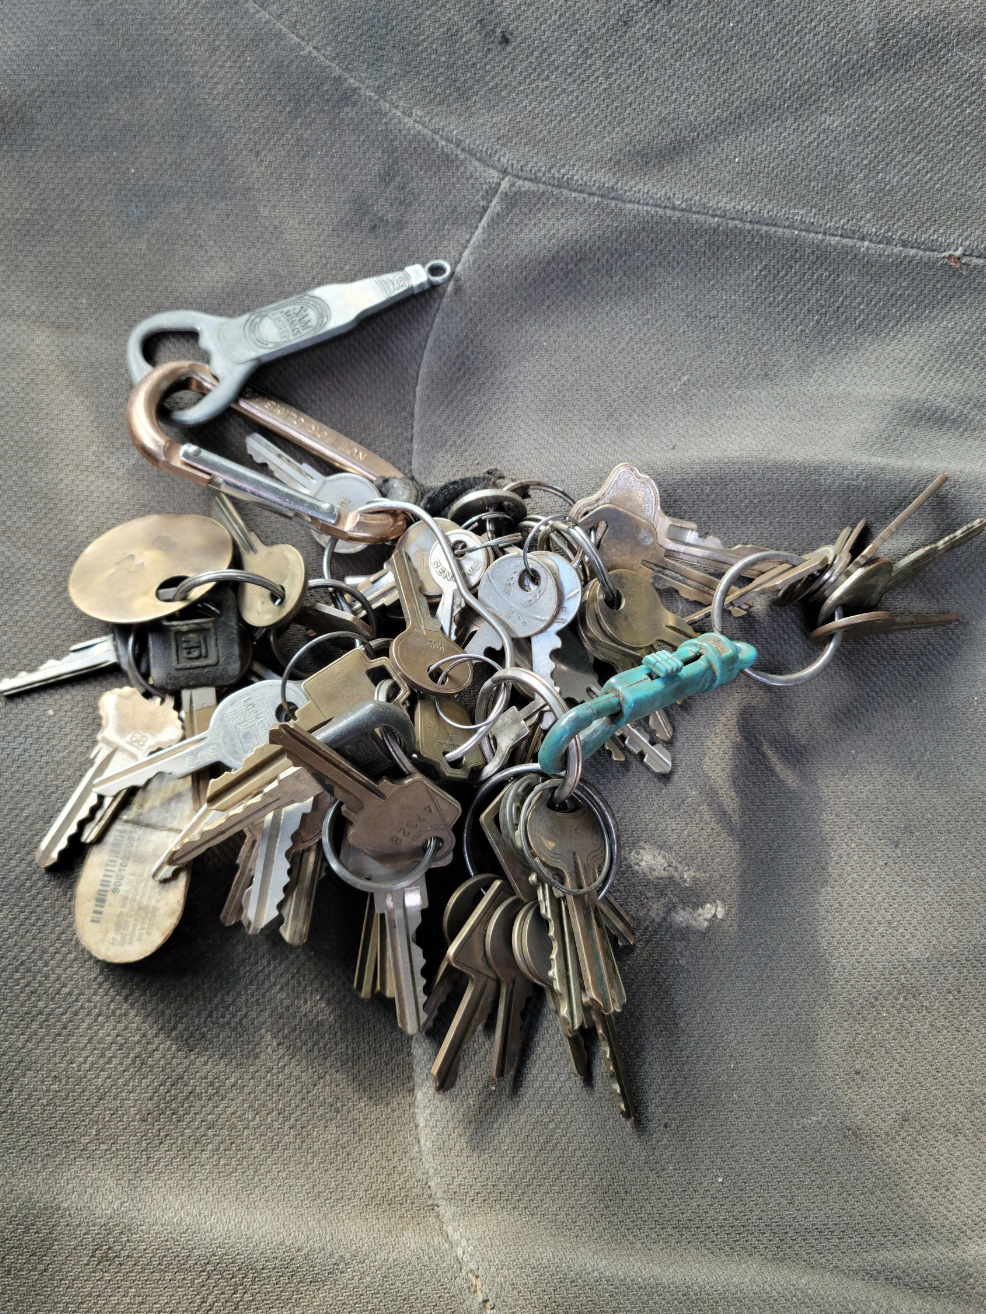 A humongous stack of keys unlabeled